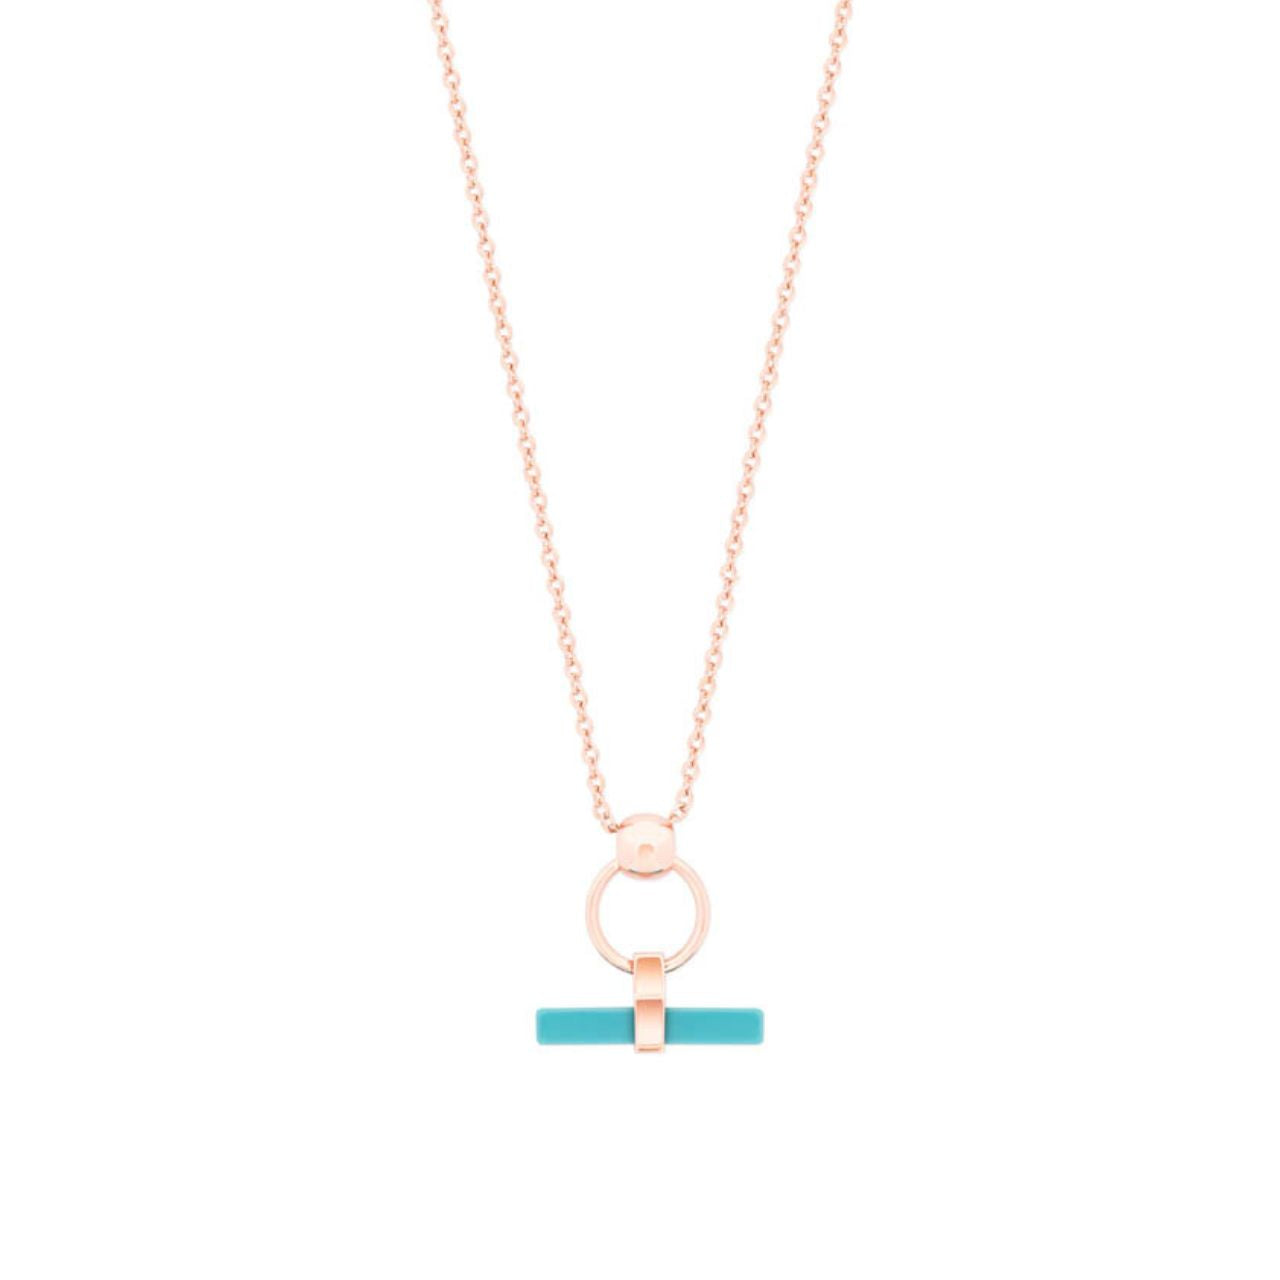 Tipperary Crystal T-Bar Turquoise Bar & Circle Pendant Rose Gold  Turquoise Bar & Circle Pendant Rose Gold - New To Collection